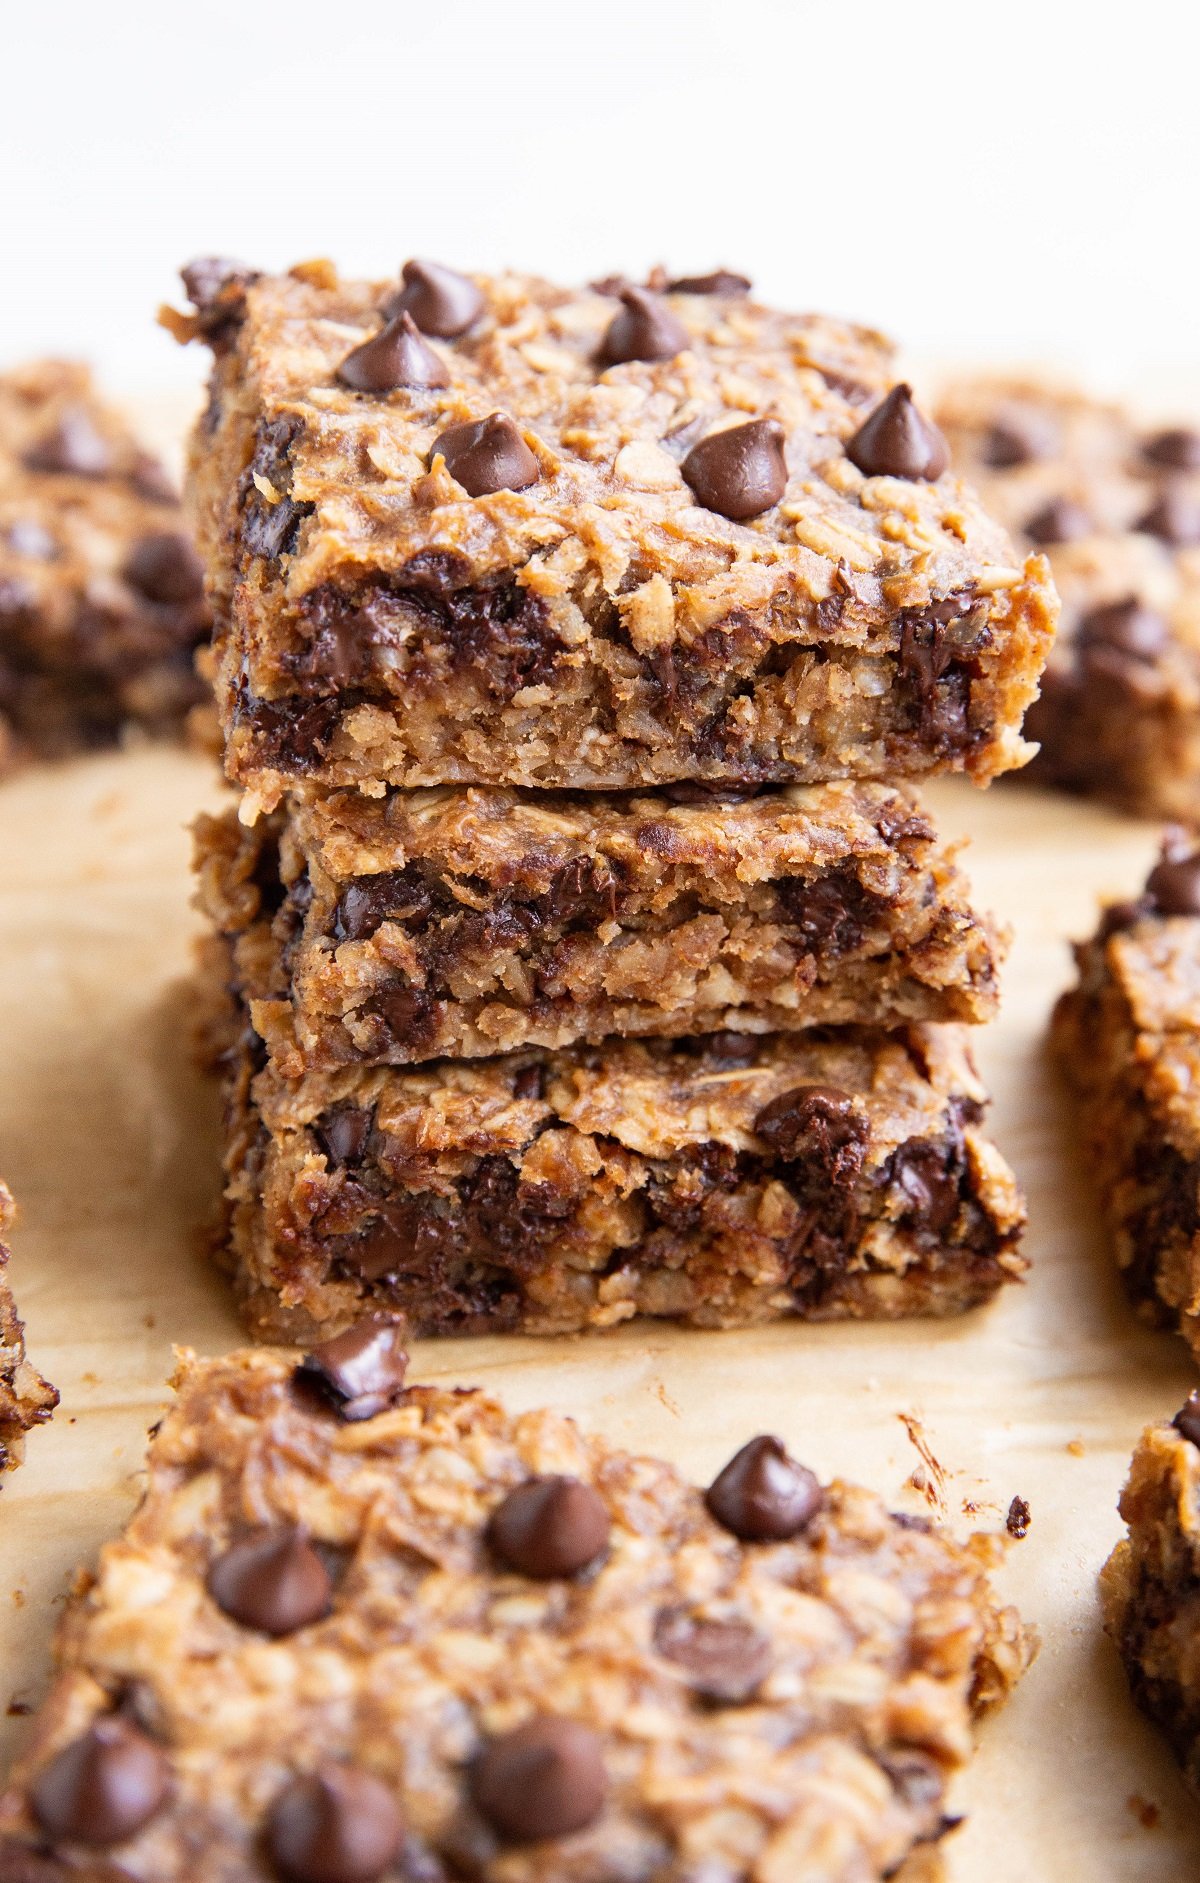 Three oatmeal peanut butter banana bars stacked on top of each other.